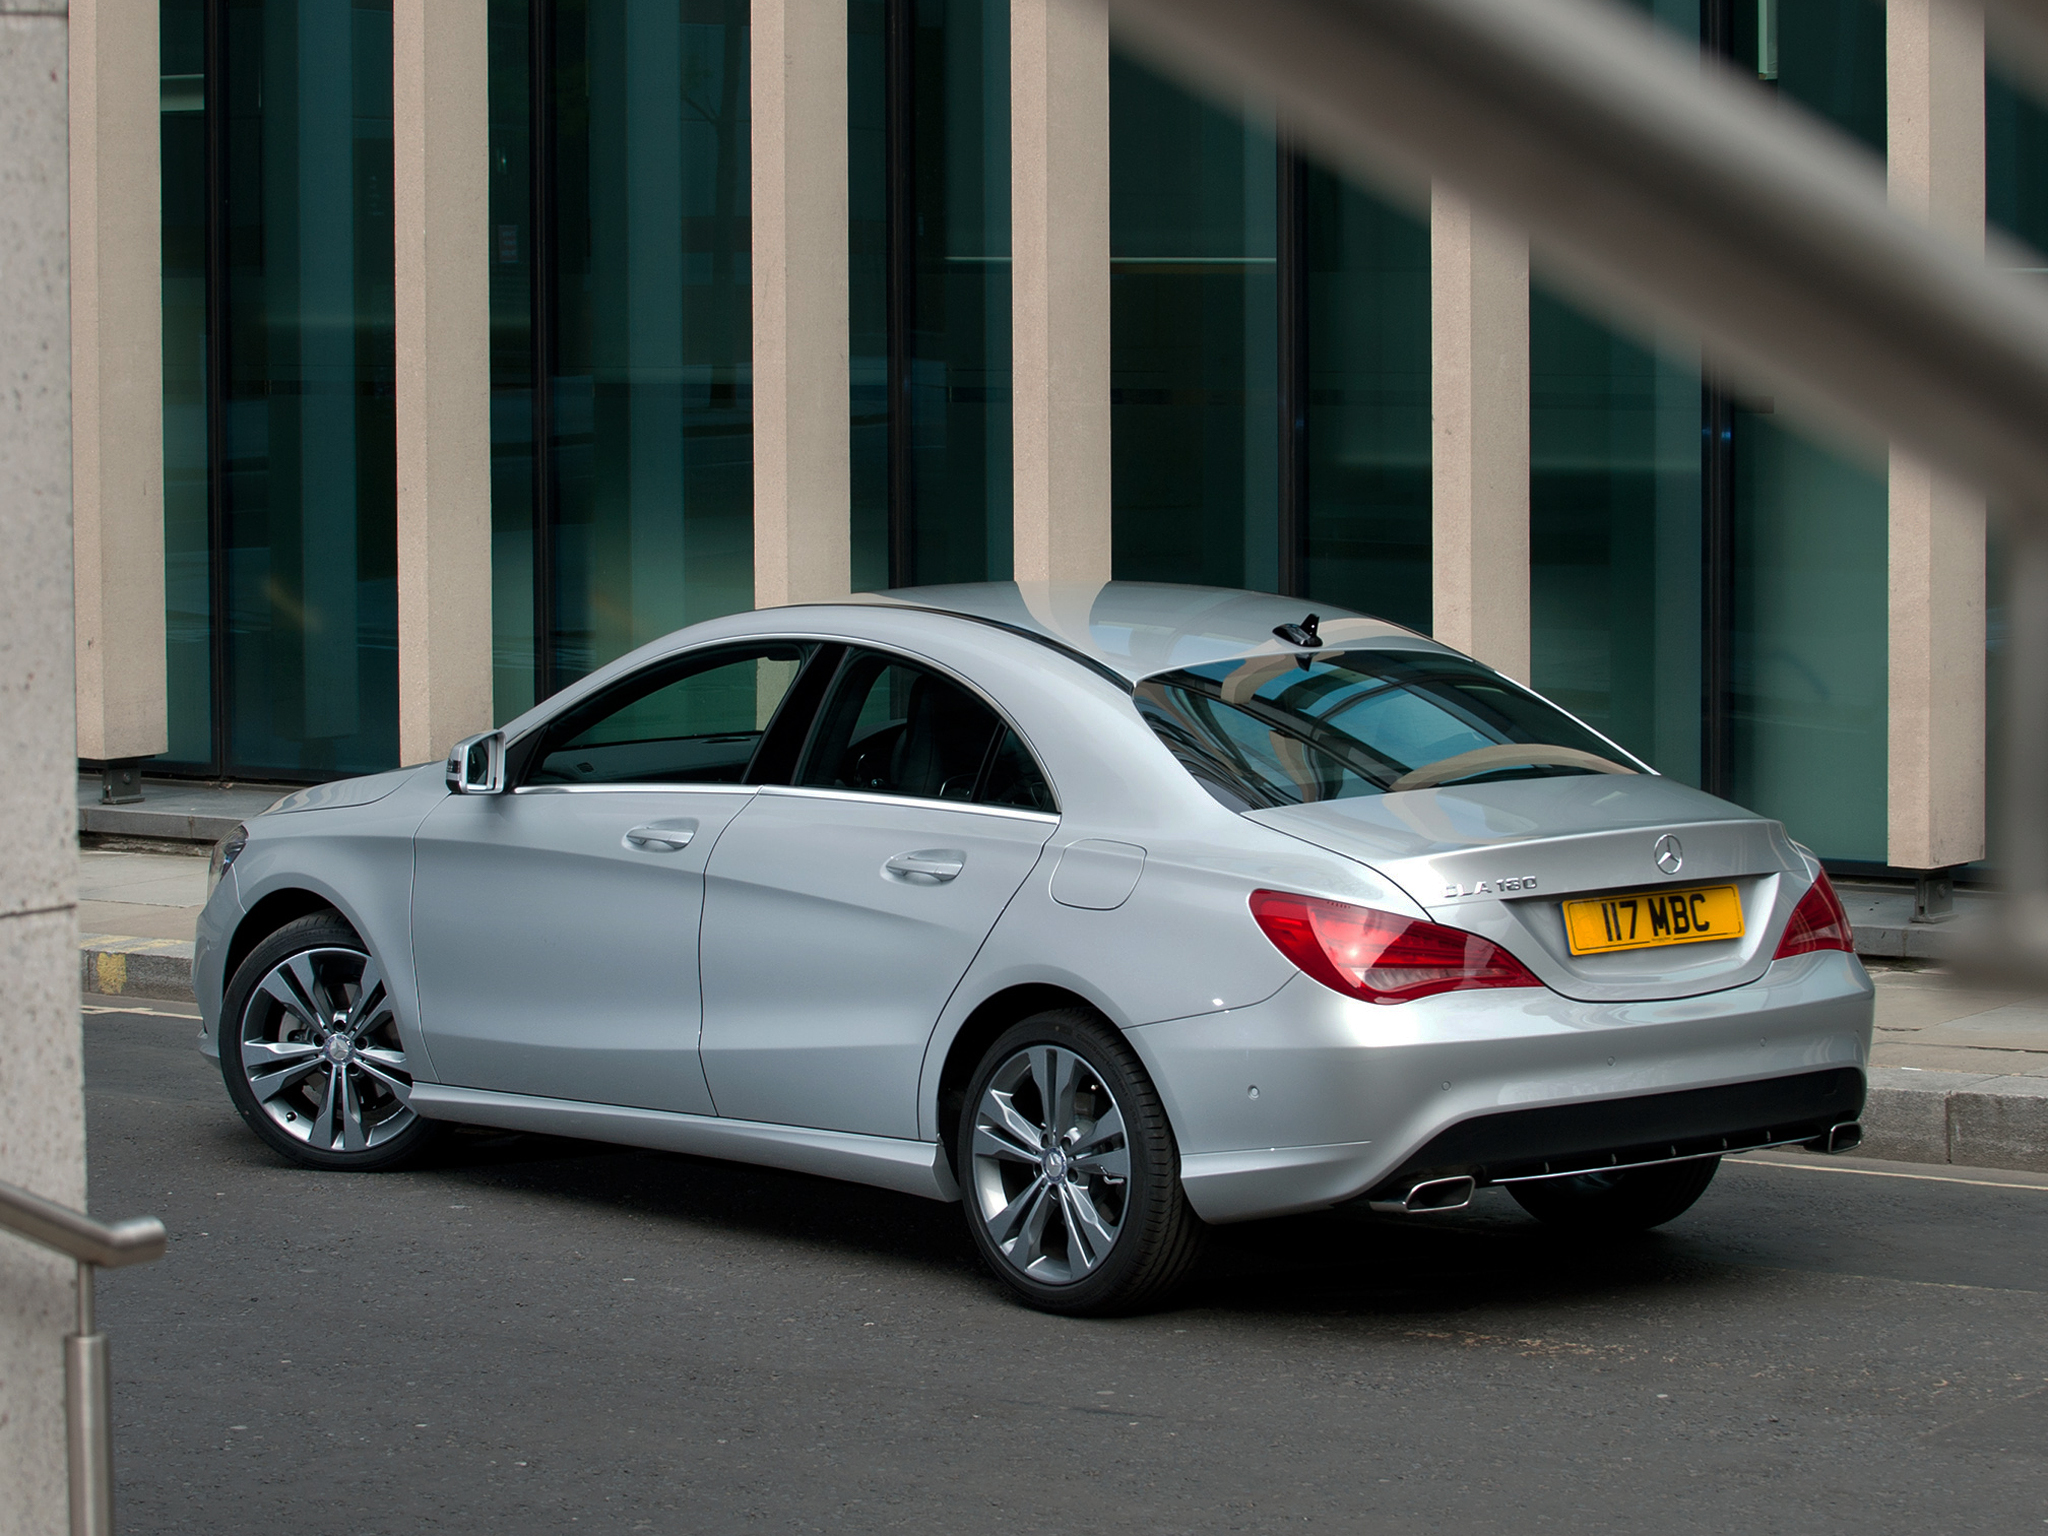 Download PC Wallpaper cars, back view, rear view, mercedes benz, silver, silvery, cla 180